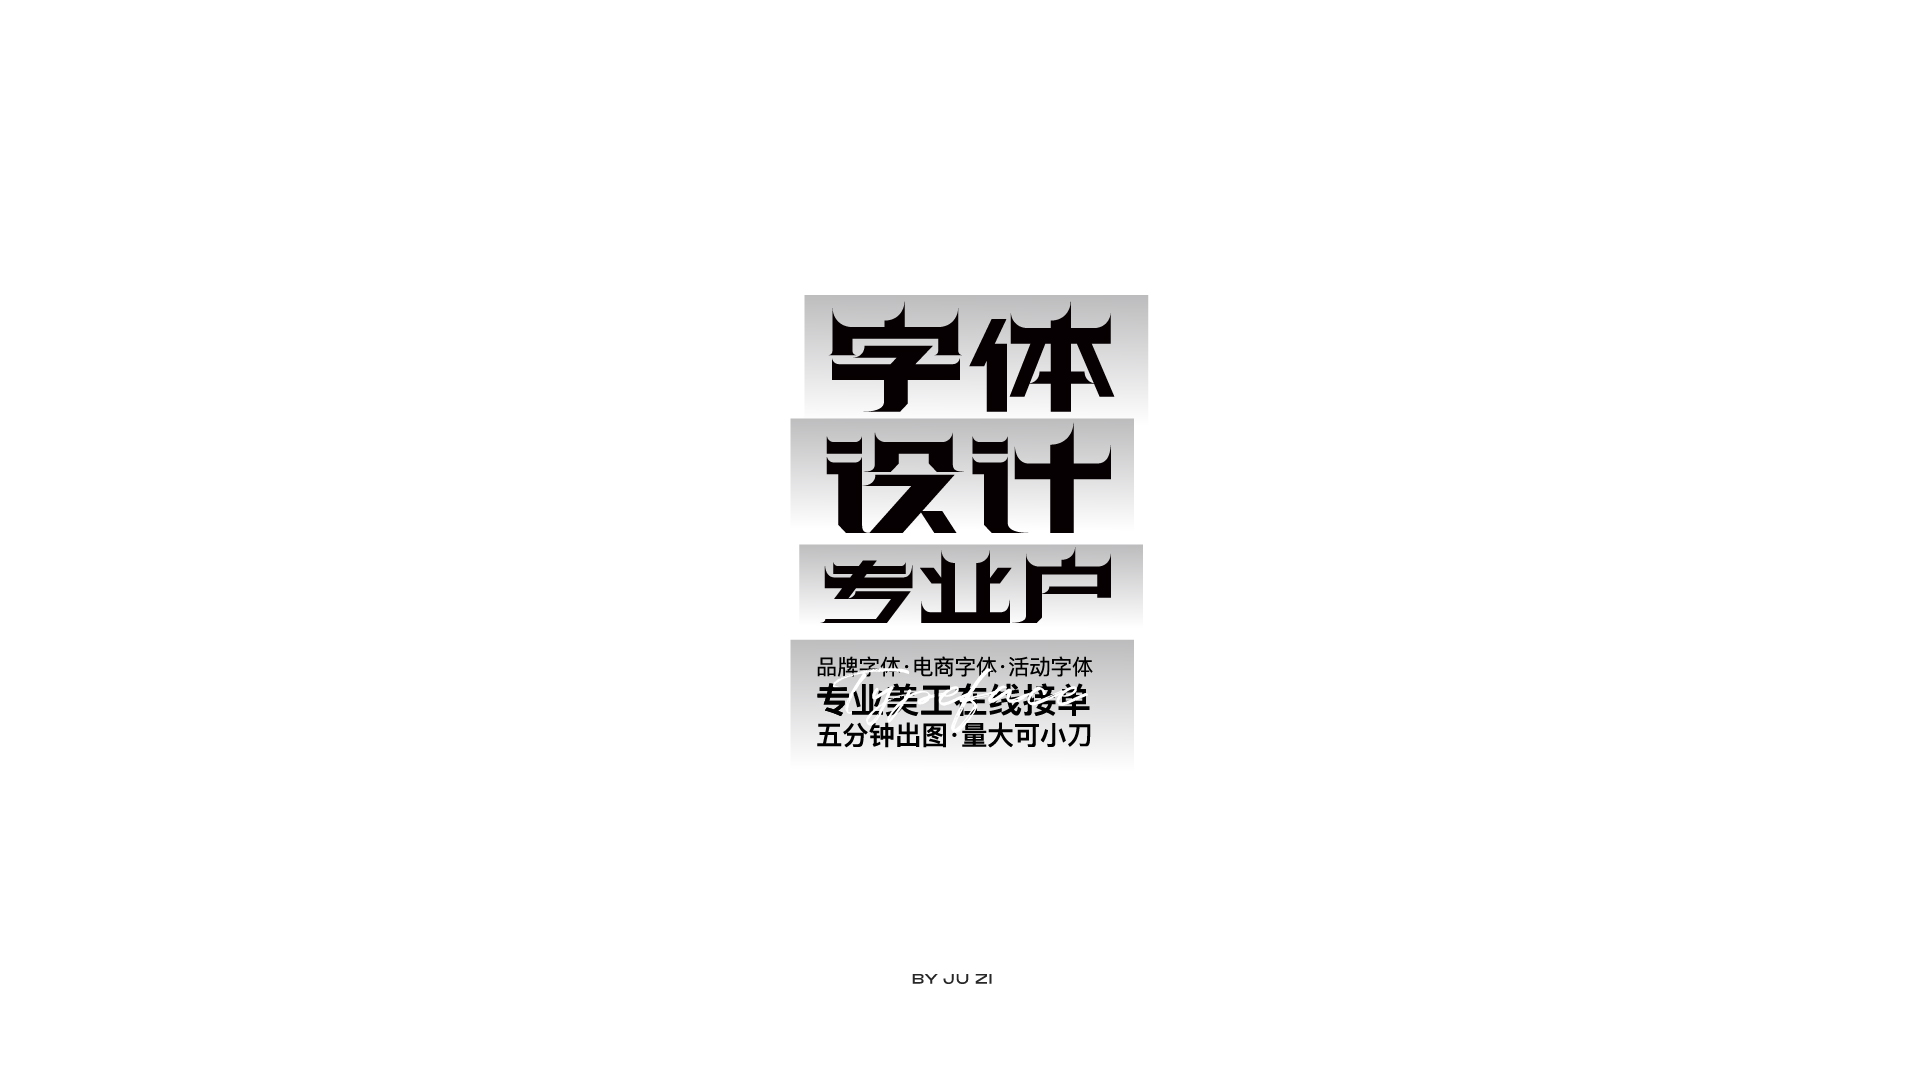 39P Collection of the latest Chinese font design schemes in 2021 #.249自言字语 ——